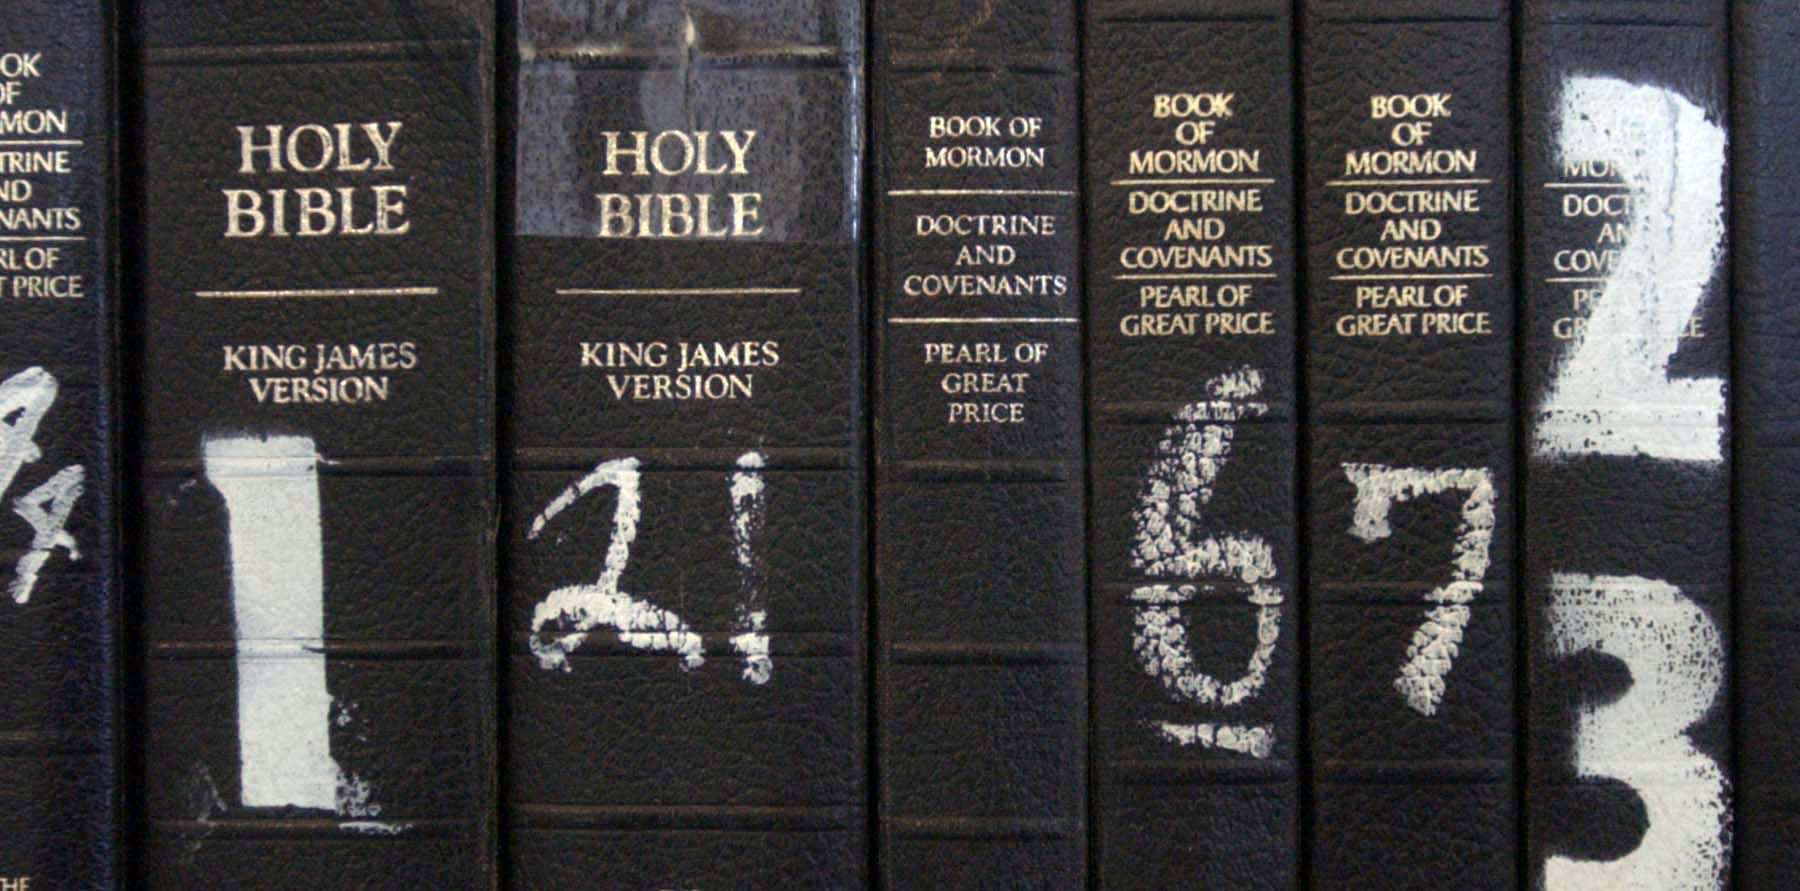 Xnxx Pona - Utah parent says Bible contains porn and should be removed from school  libraries